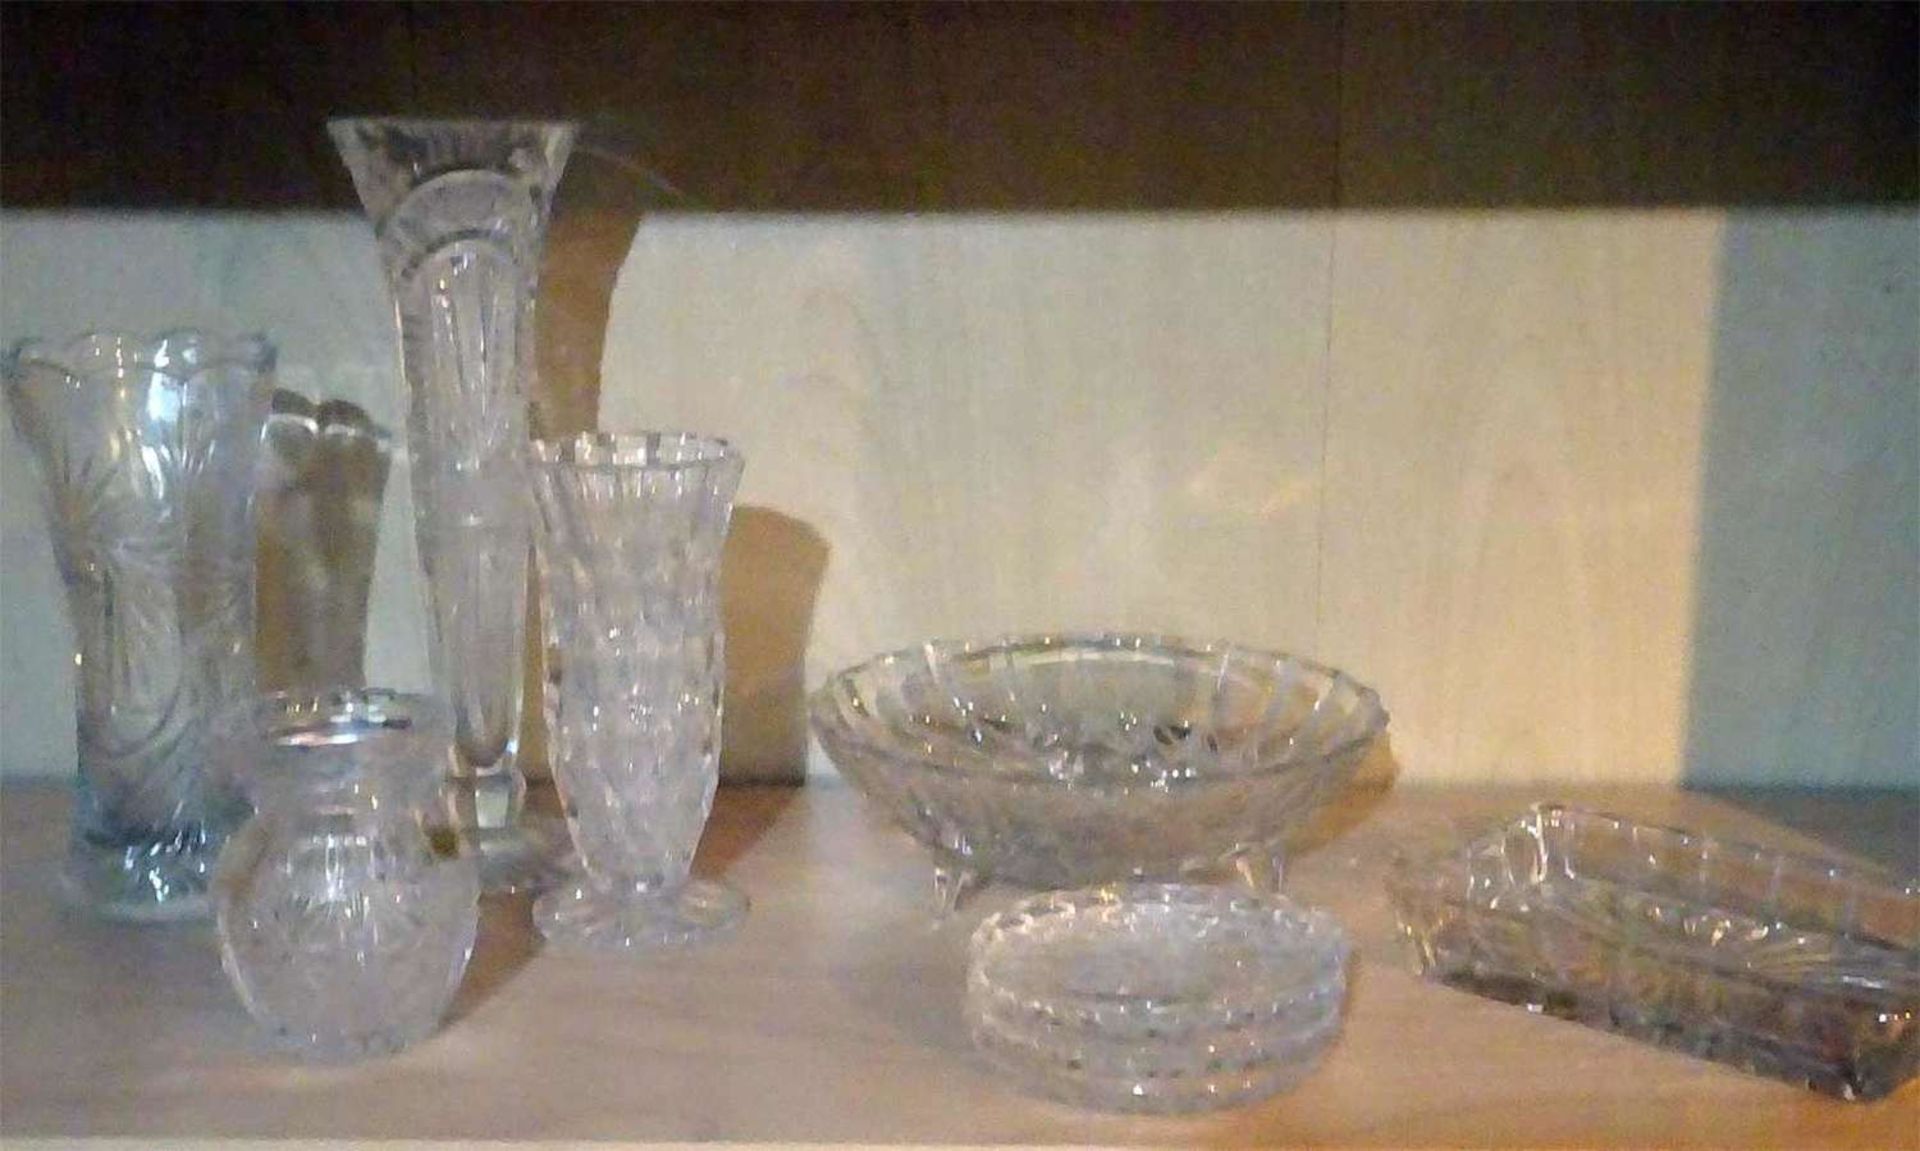 Lot crystal glass, consisting of 4 vases, 1 bowl, 3 coasters, and 1 bowl. Different models.